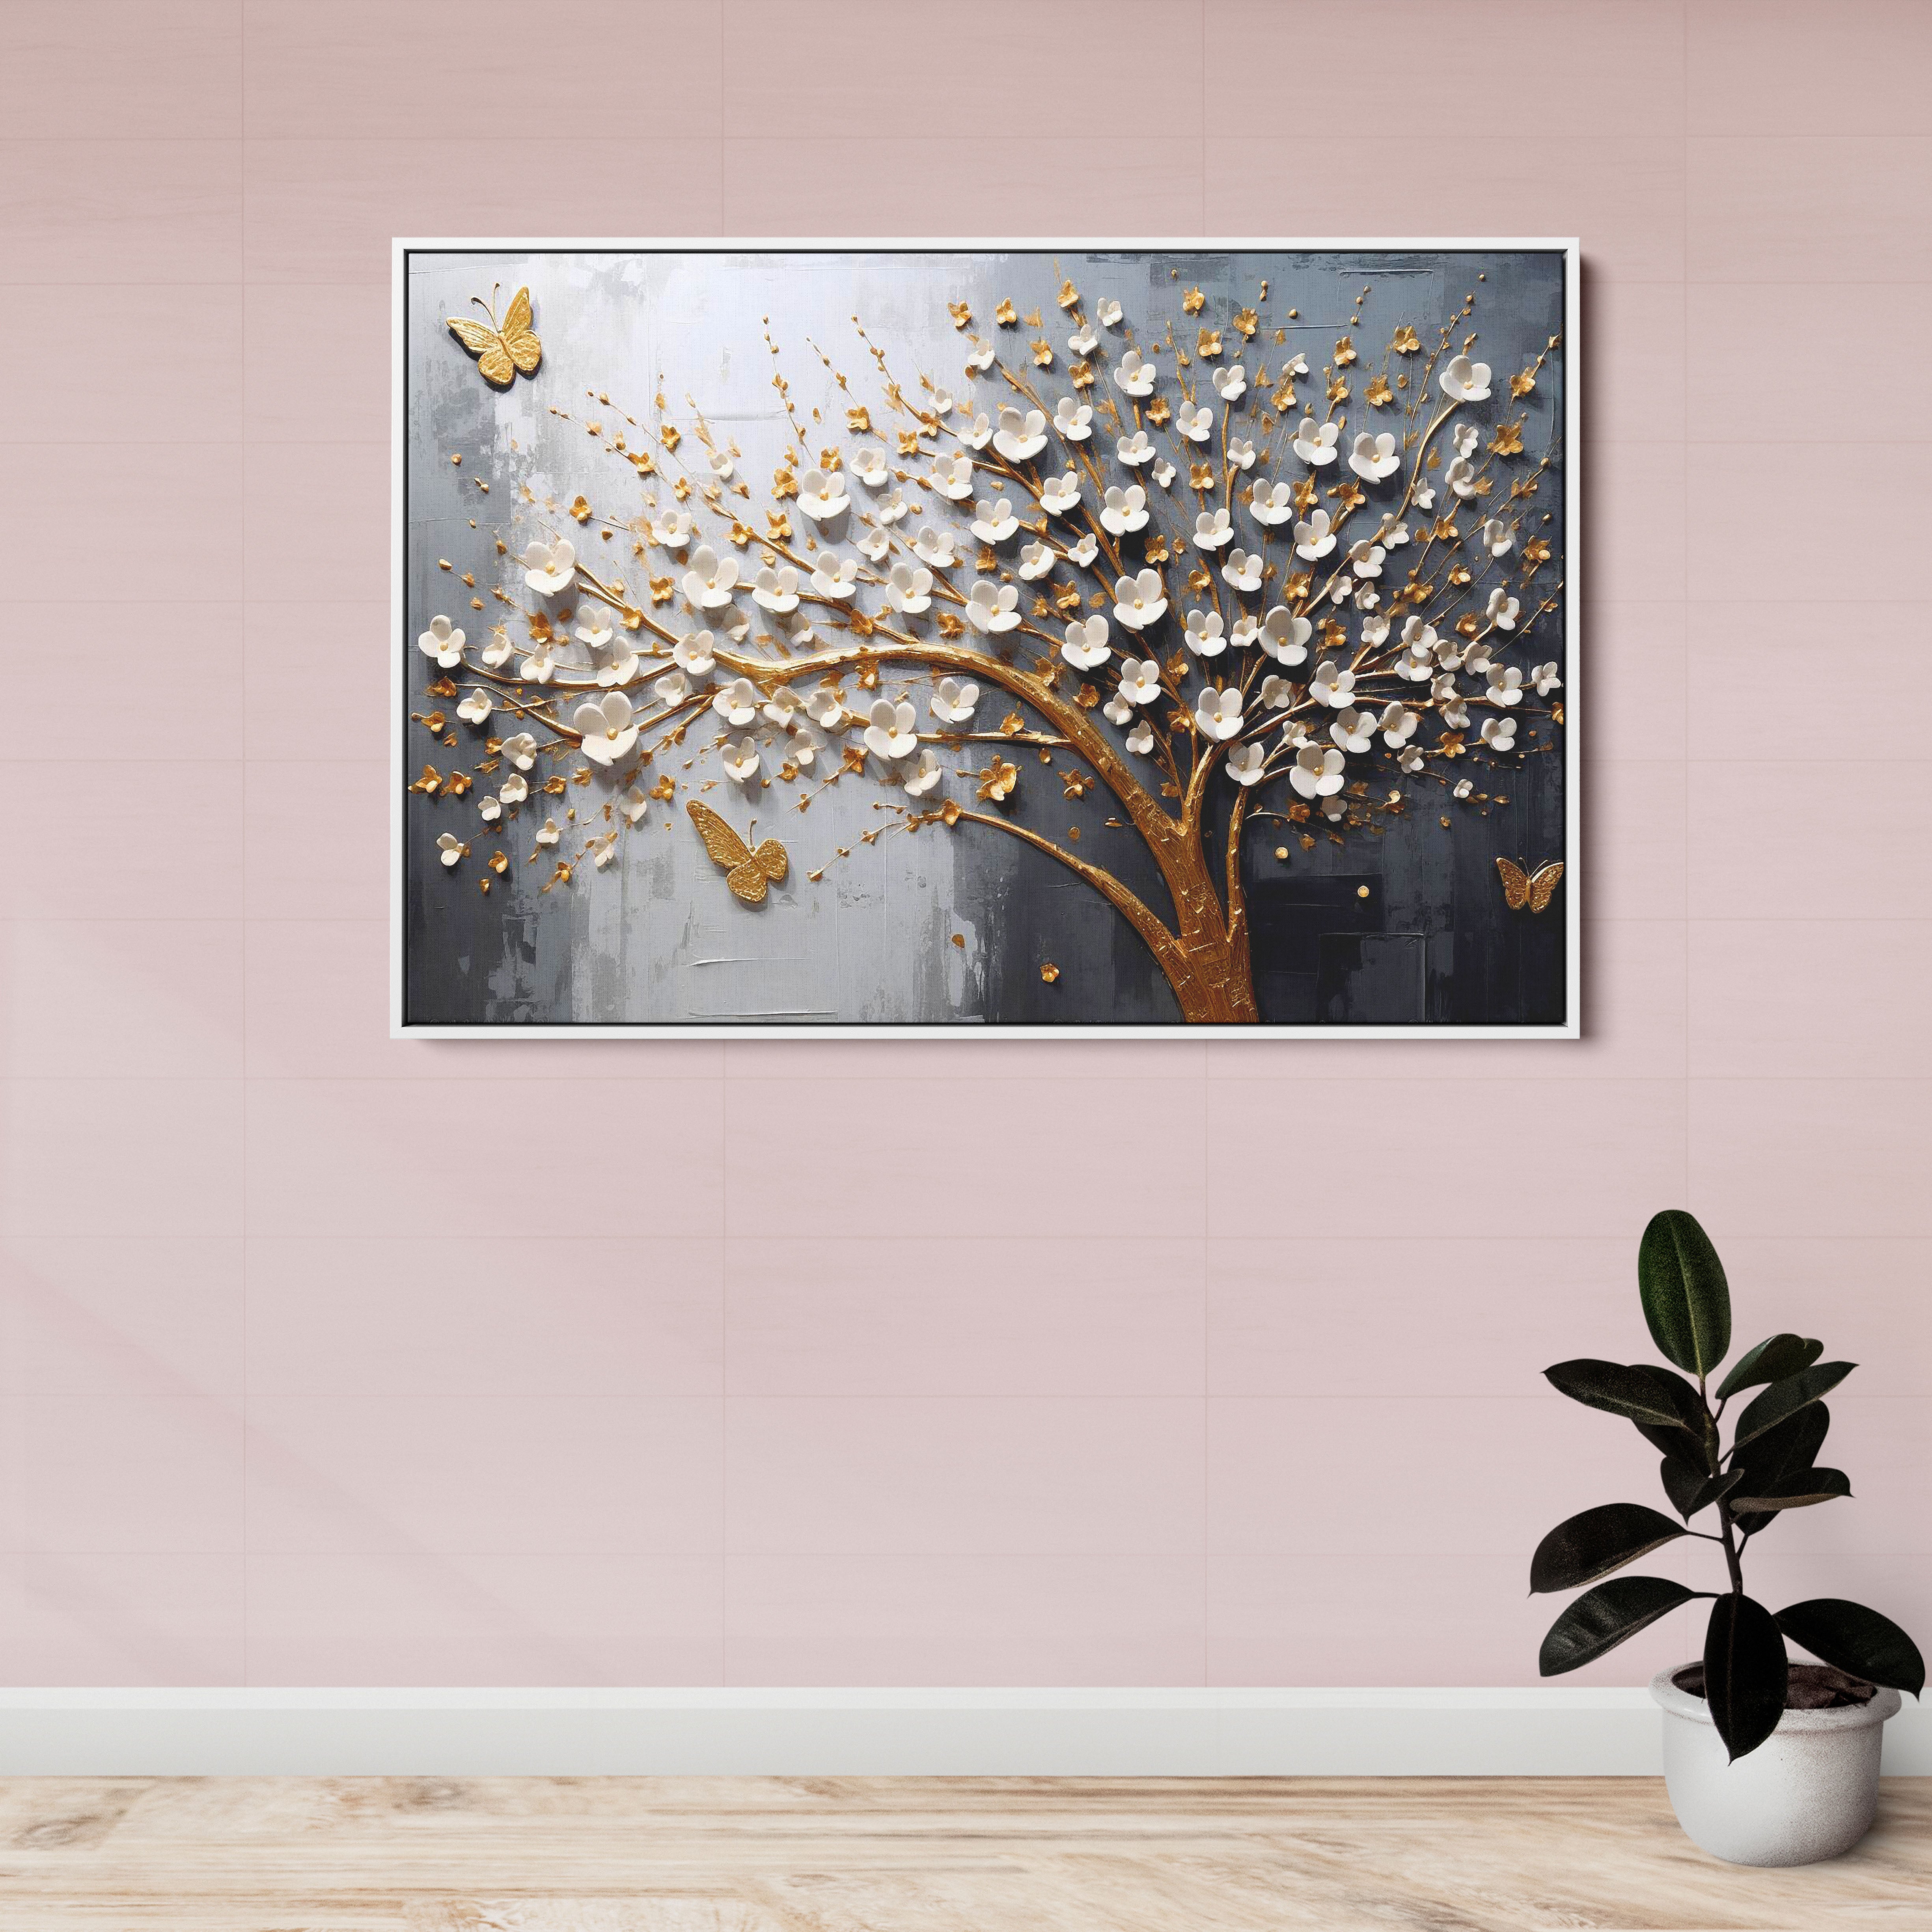 White Flower Tree and Golden Butterfly Canvas Wall Painting